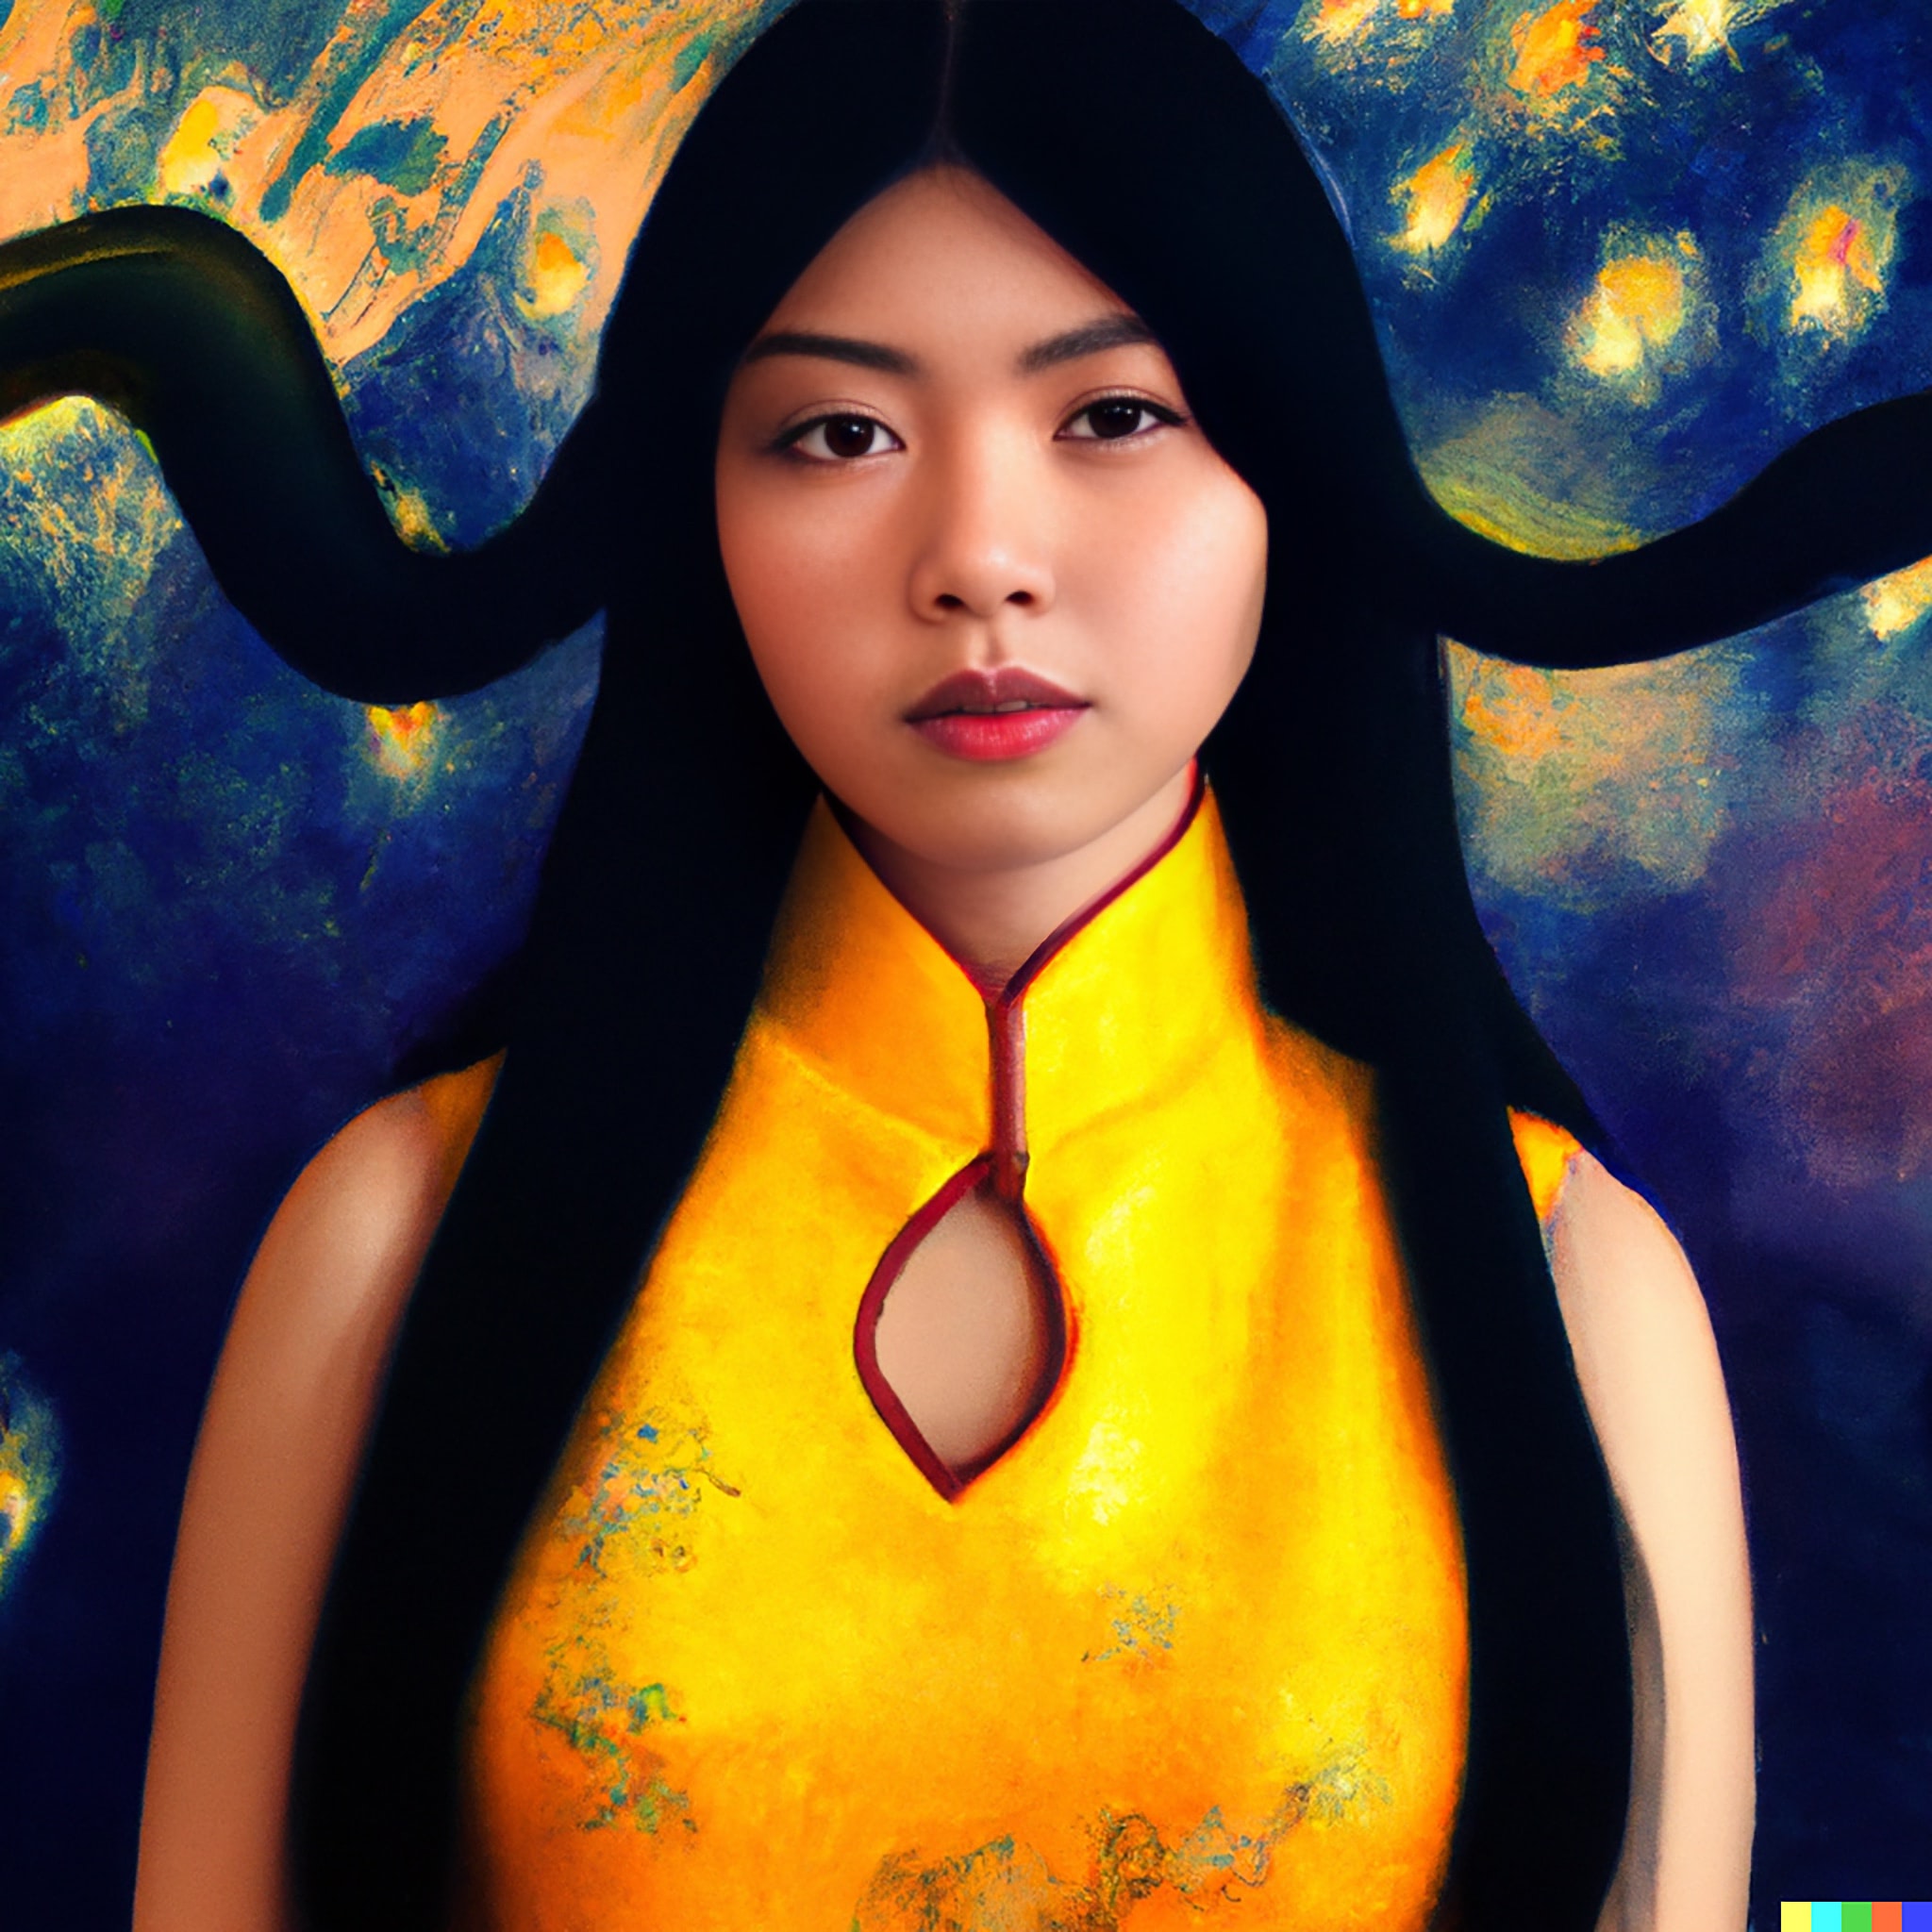 headshot-of-a-chinese-woman-with-black-hair-and-a-traditional-chinese-pattern-yellow-dress-1